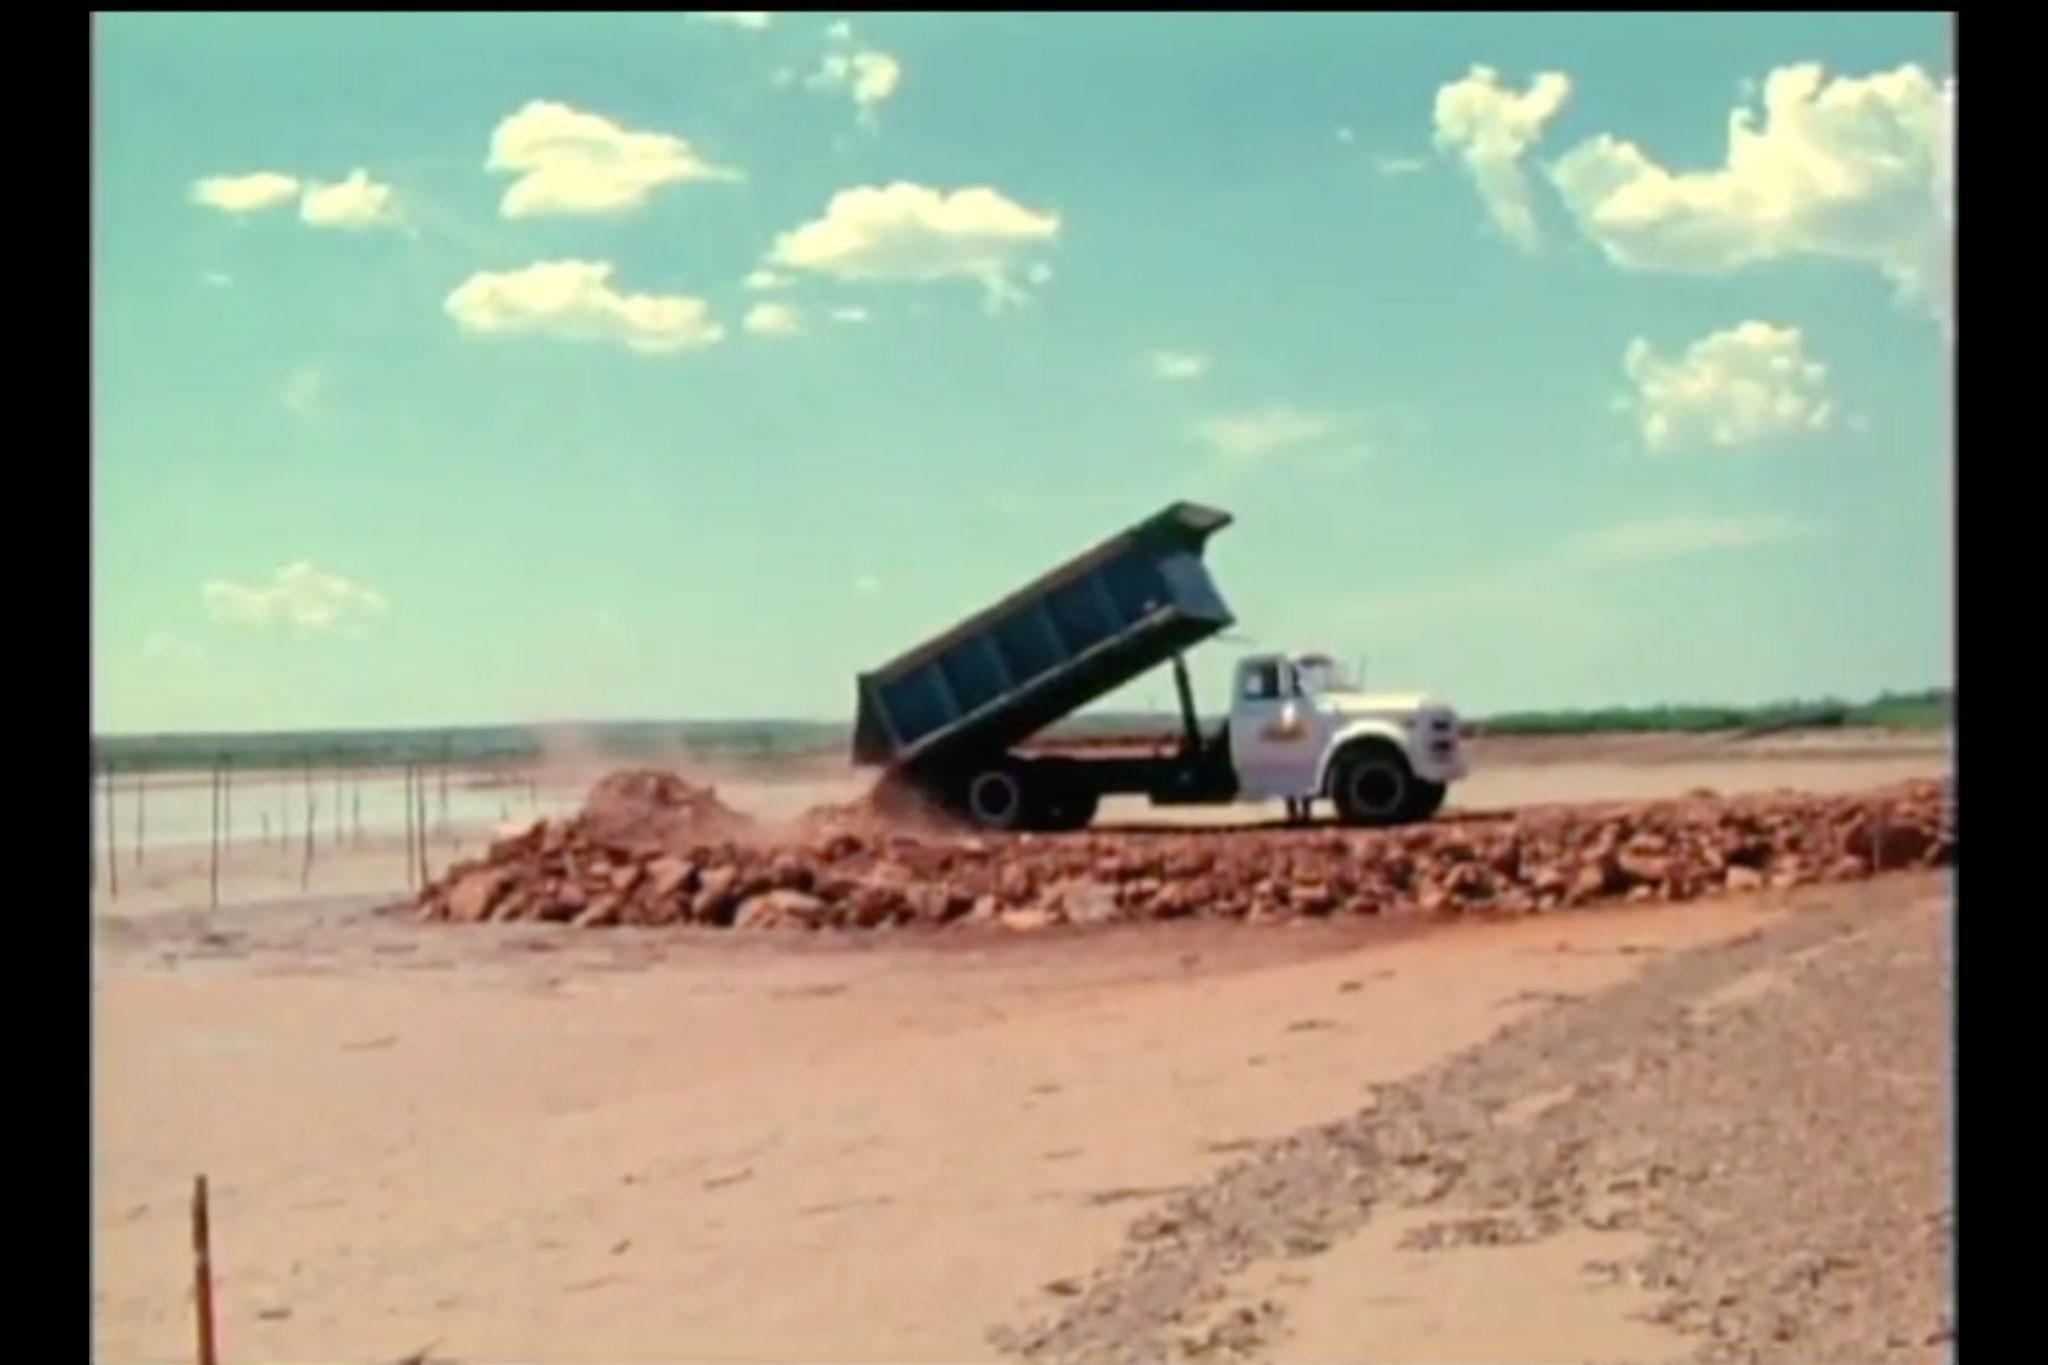 A dump truck dumping rock and earth at the edge of a lakebed